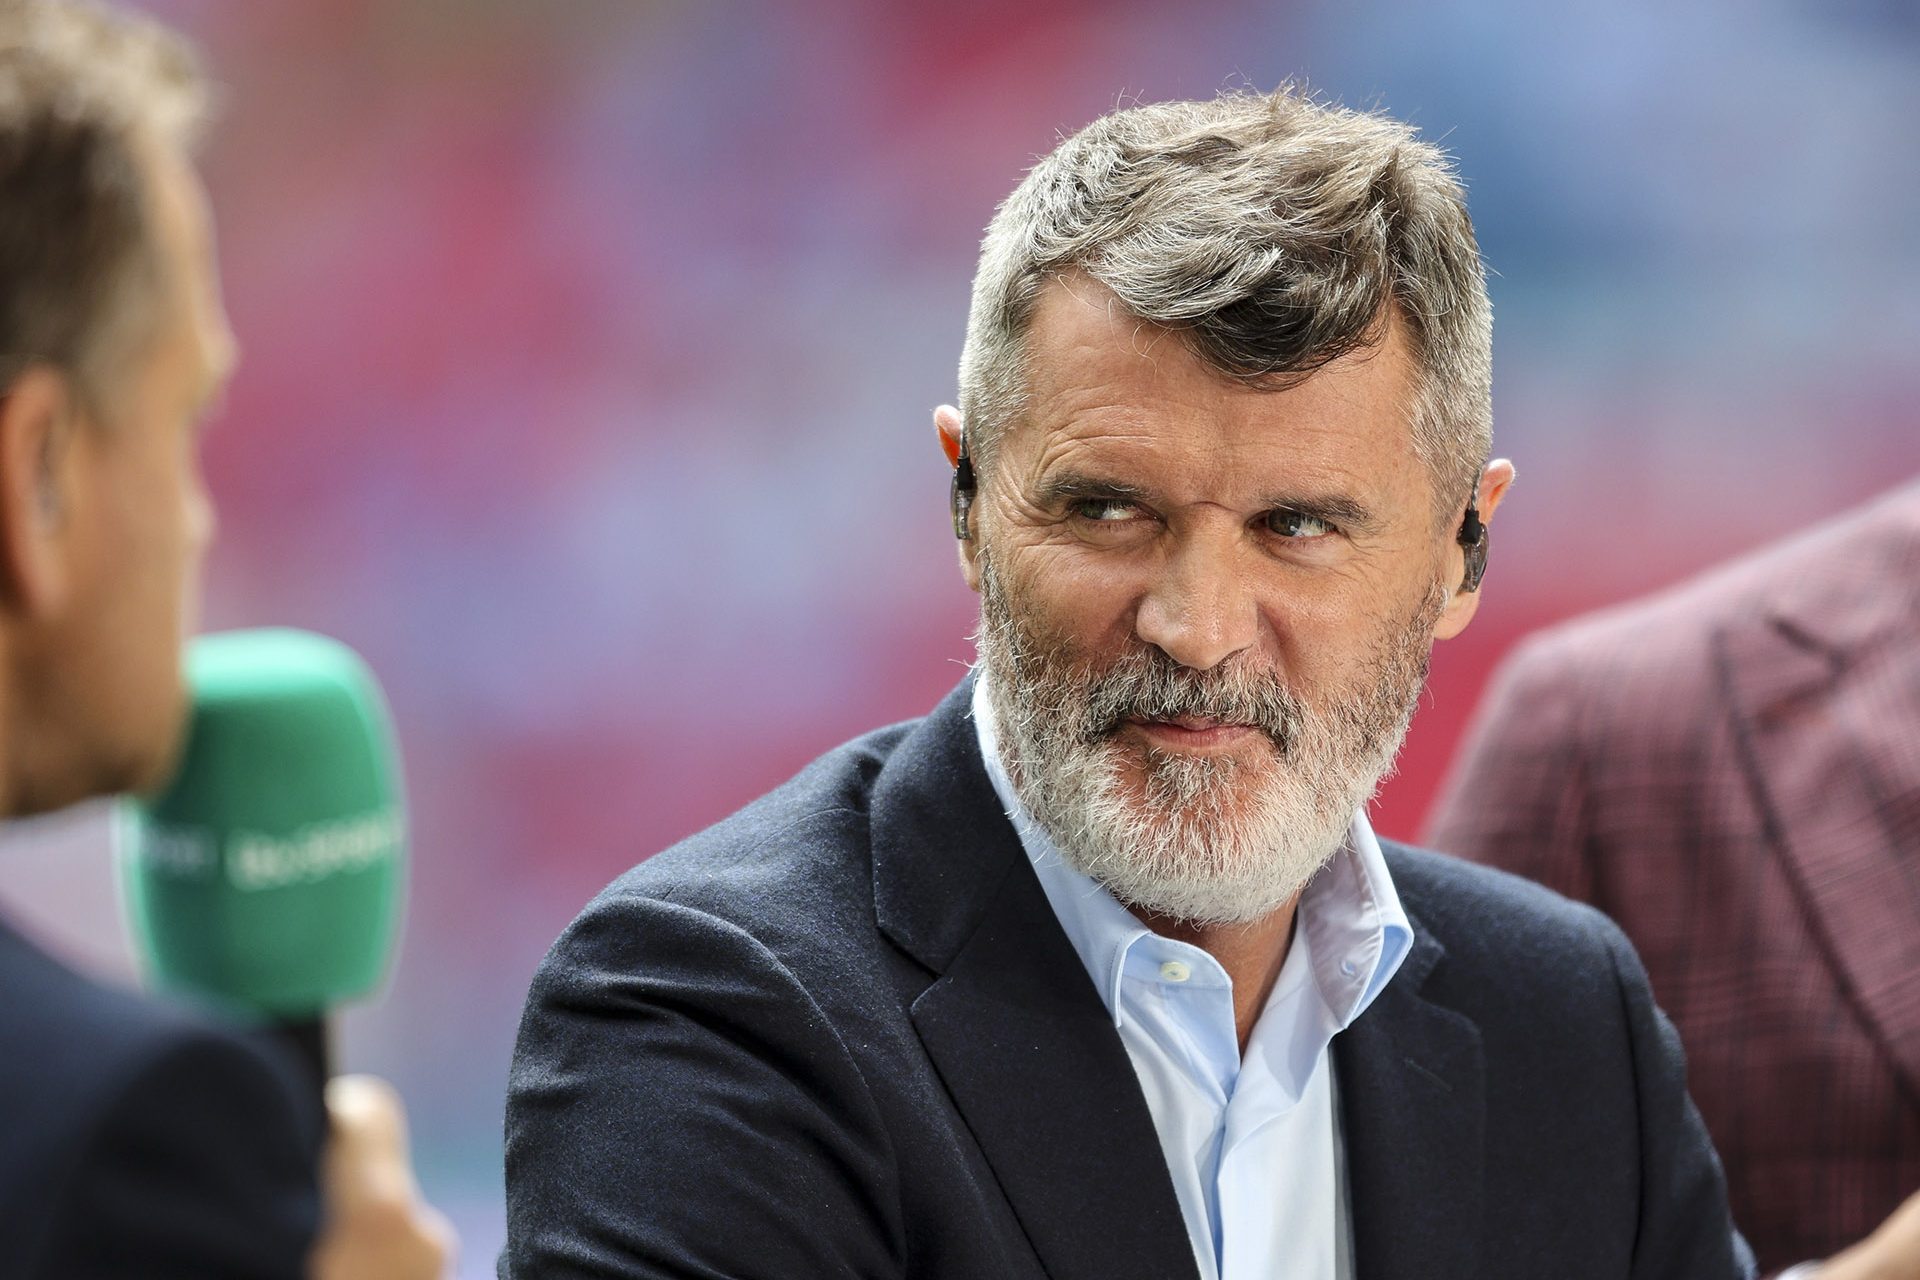 'Going along nicely': Roy Keane warns the Netherlands ahead of clash with England